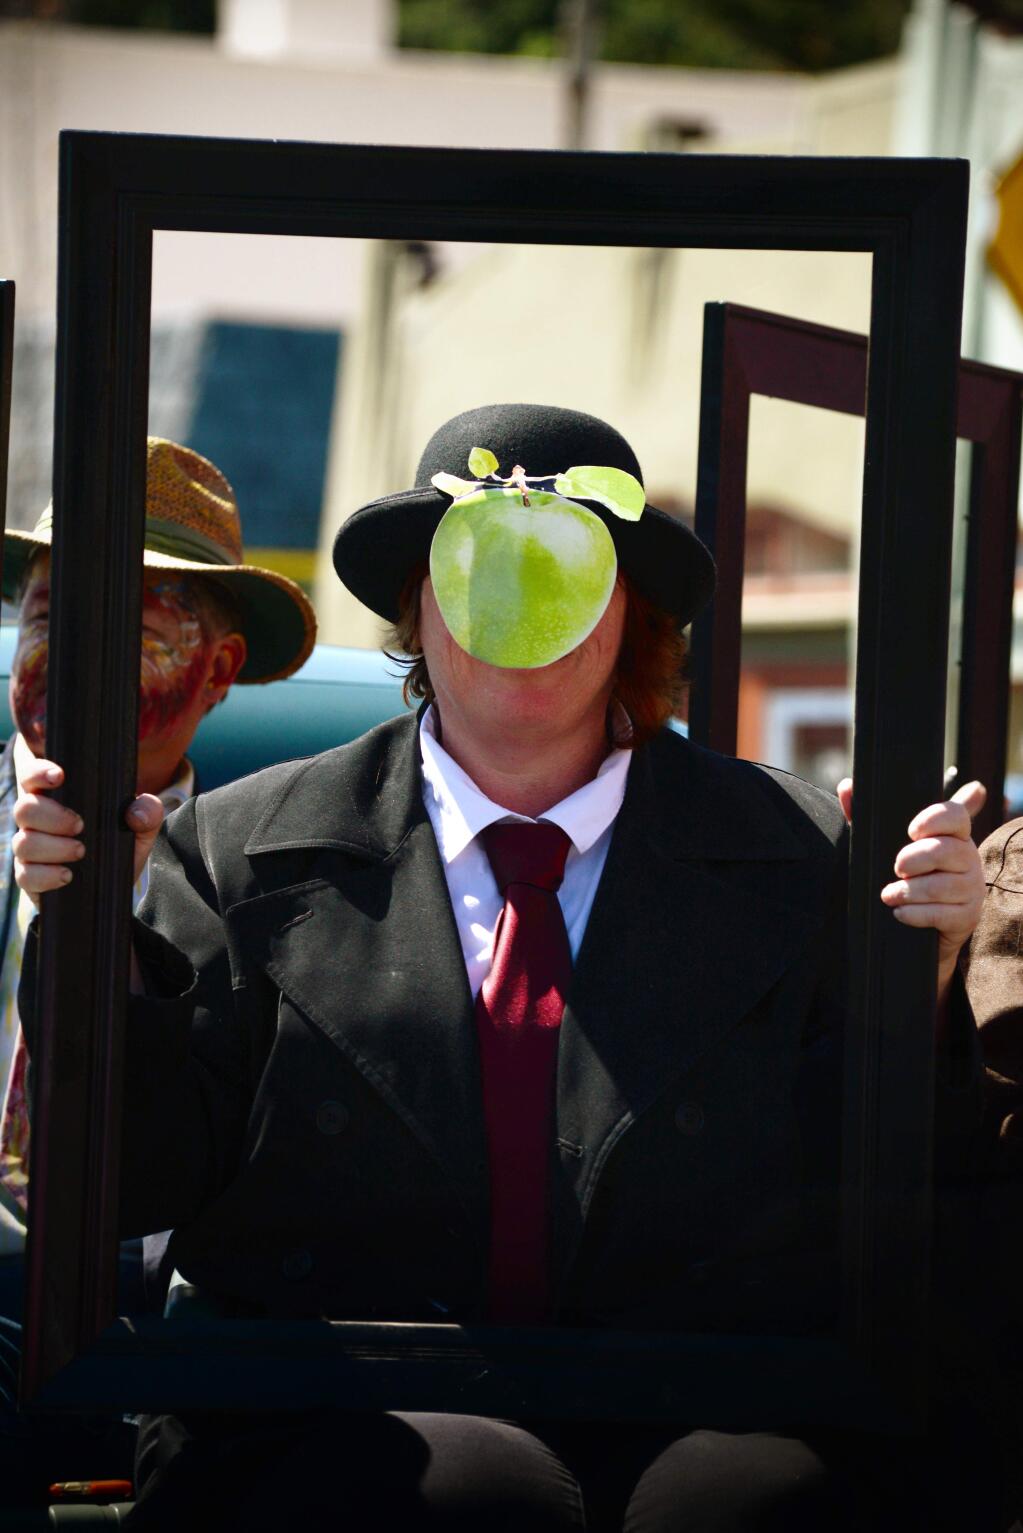 A woman poses as 'The Son of Man' by the Belgian surrealist painter René Magritte in a Studebaker for Art at the Source during the 70th annual Apple Blossom Parade held in Sebastopol Saturday. April 16, 2016. (Photo: Erik Castro/for The Press Democrat)